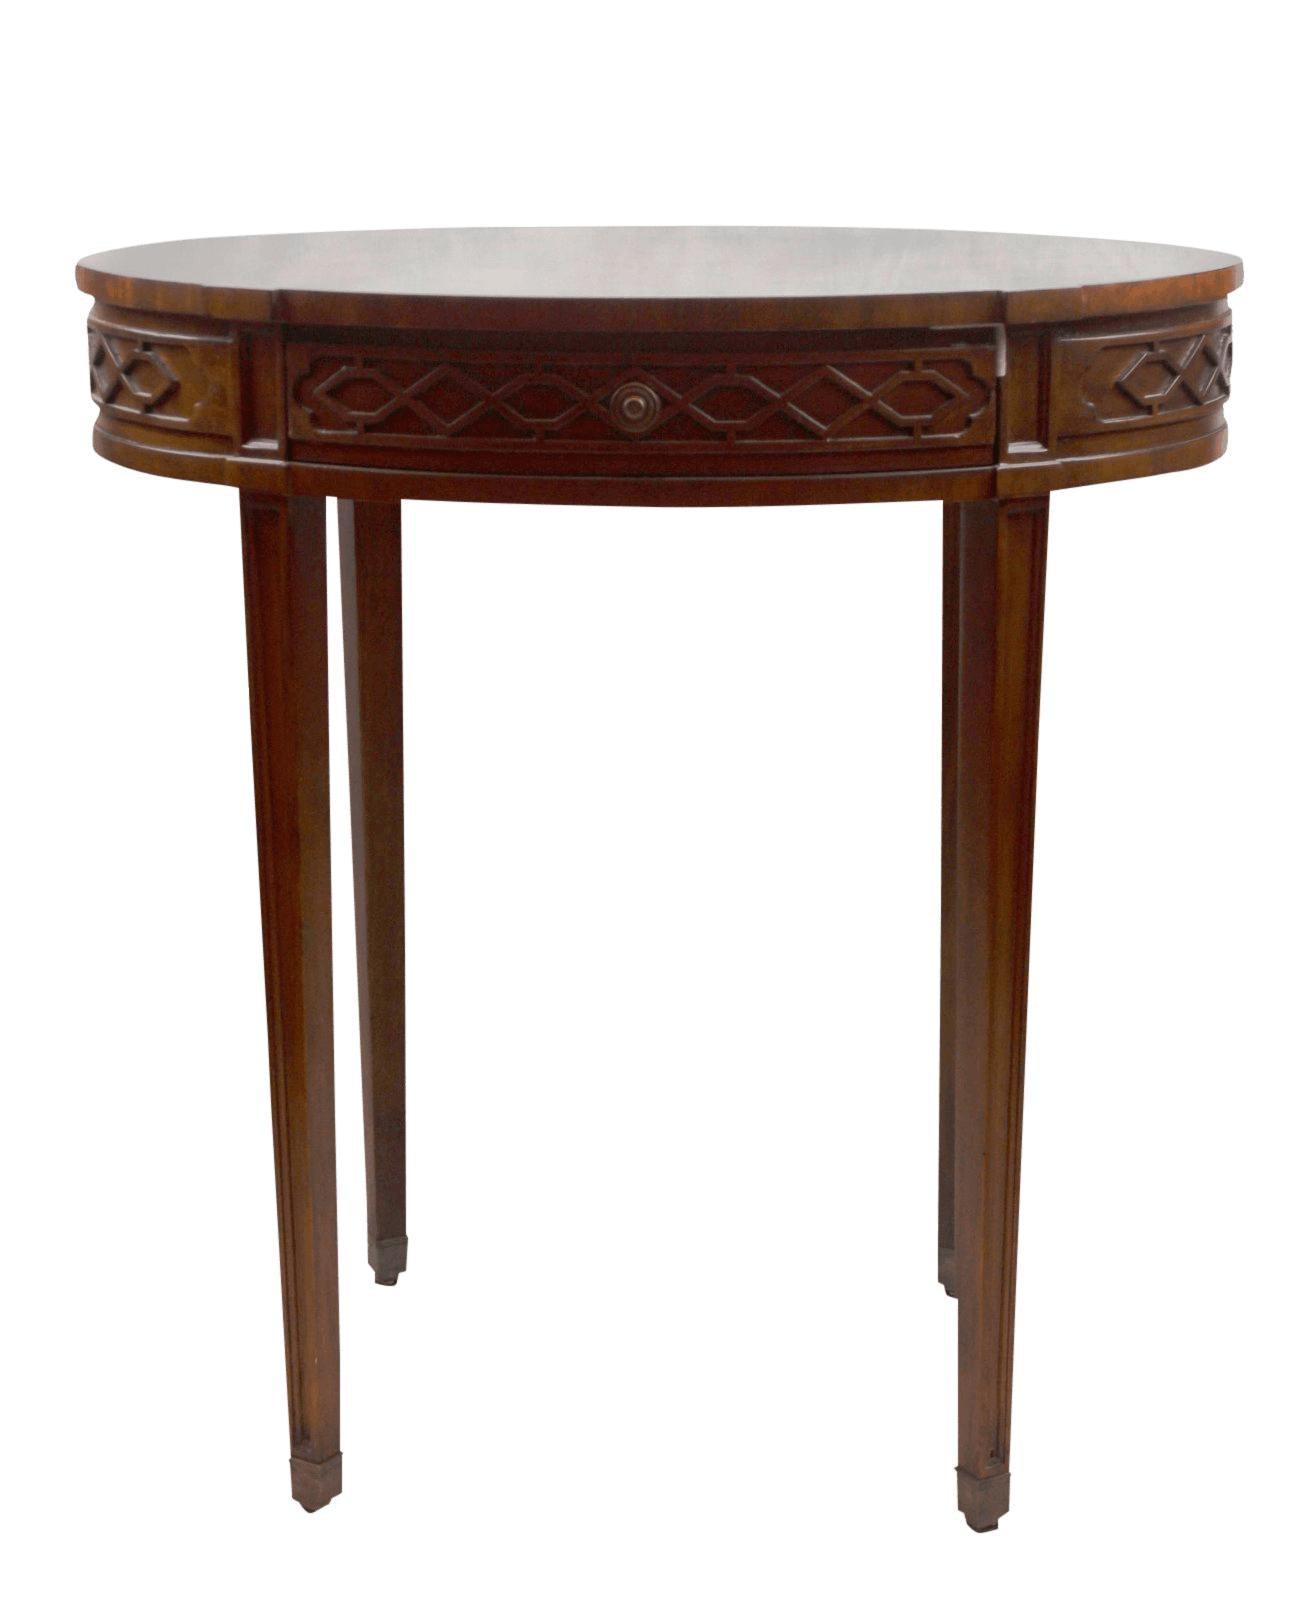 Canvello Regency Finished Mahogany and Parquetry Oval Occasional Table - Canvello